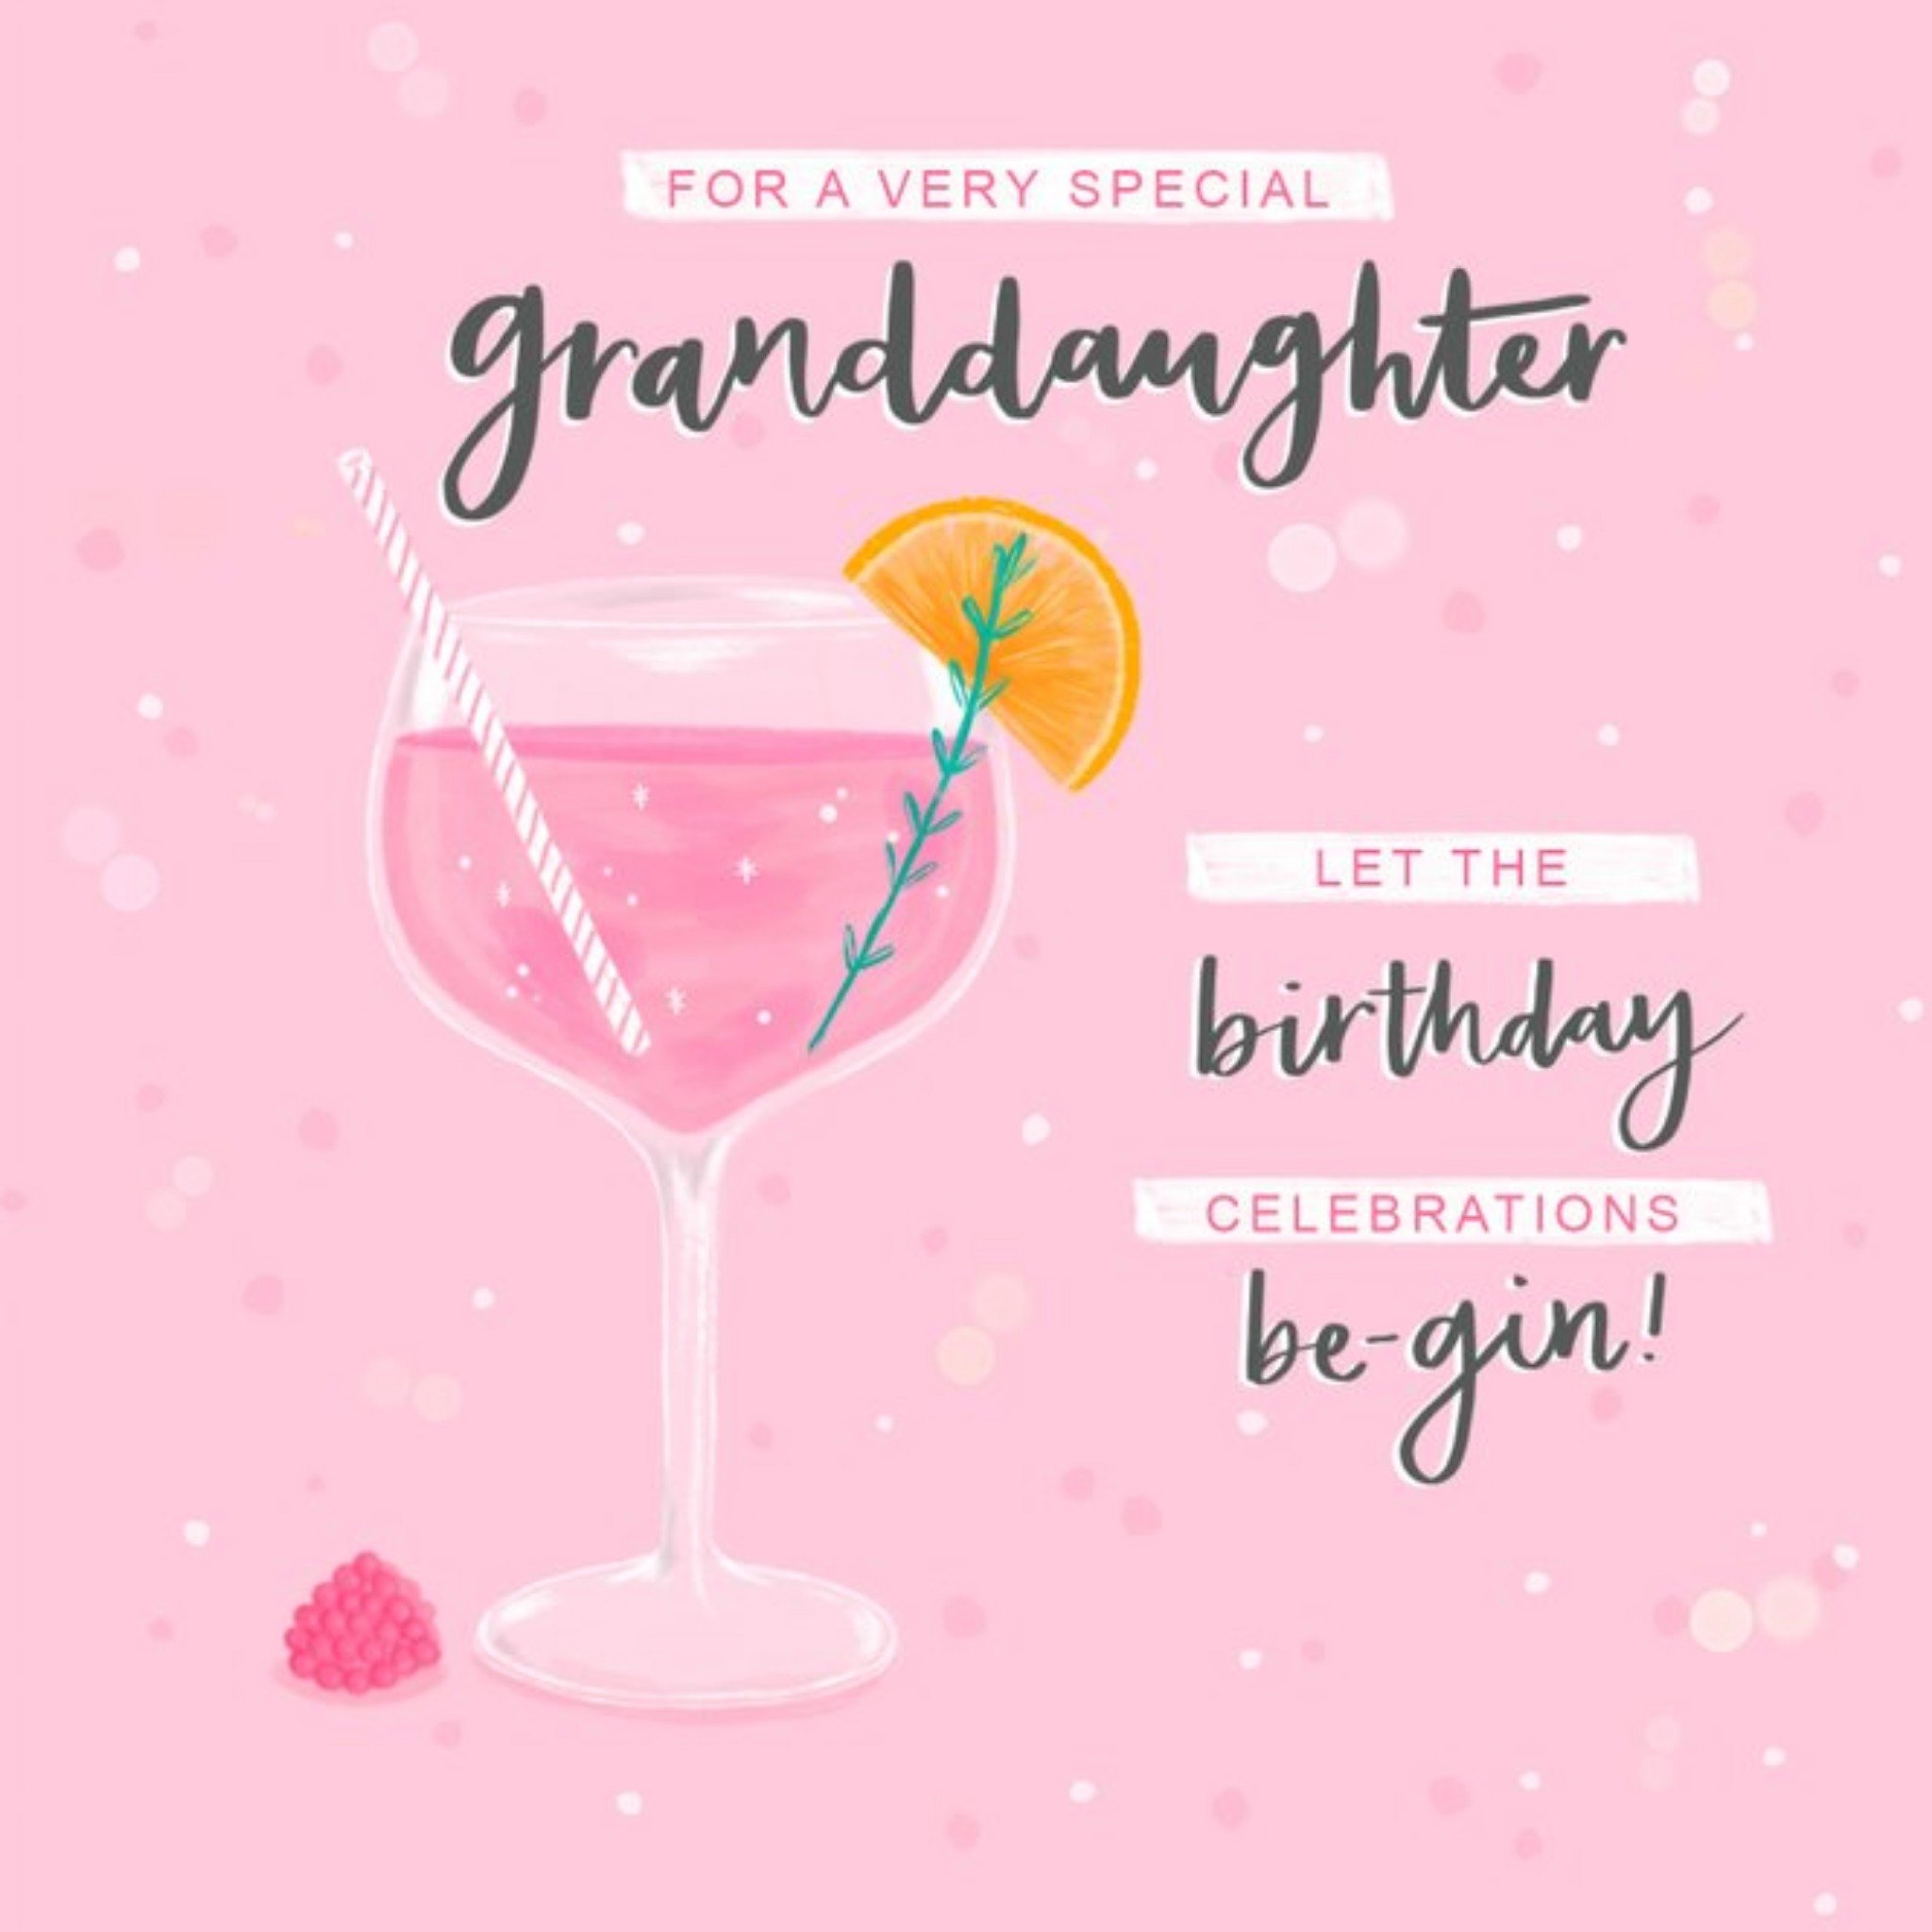 Moonpig Illustrated Gin Cocktail Glass Granddaughter Birthday Card, Square